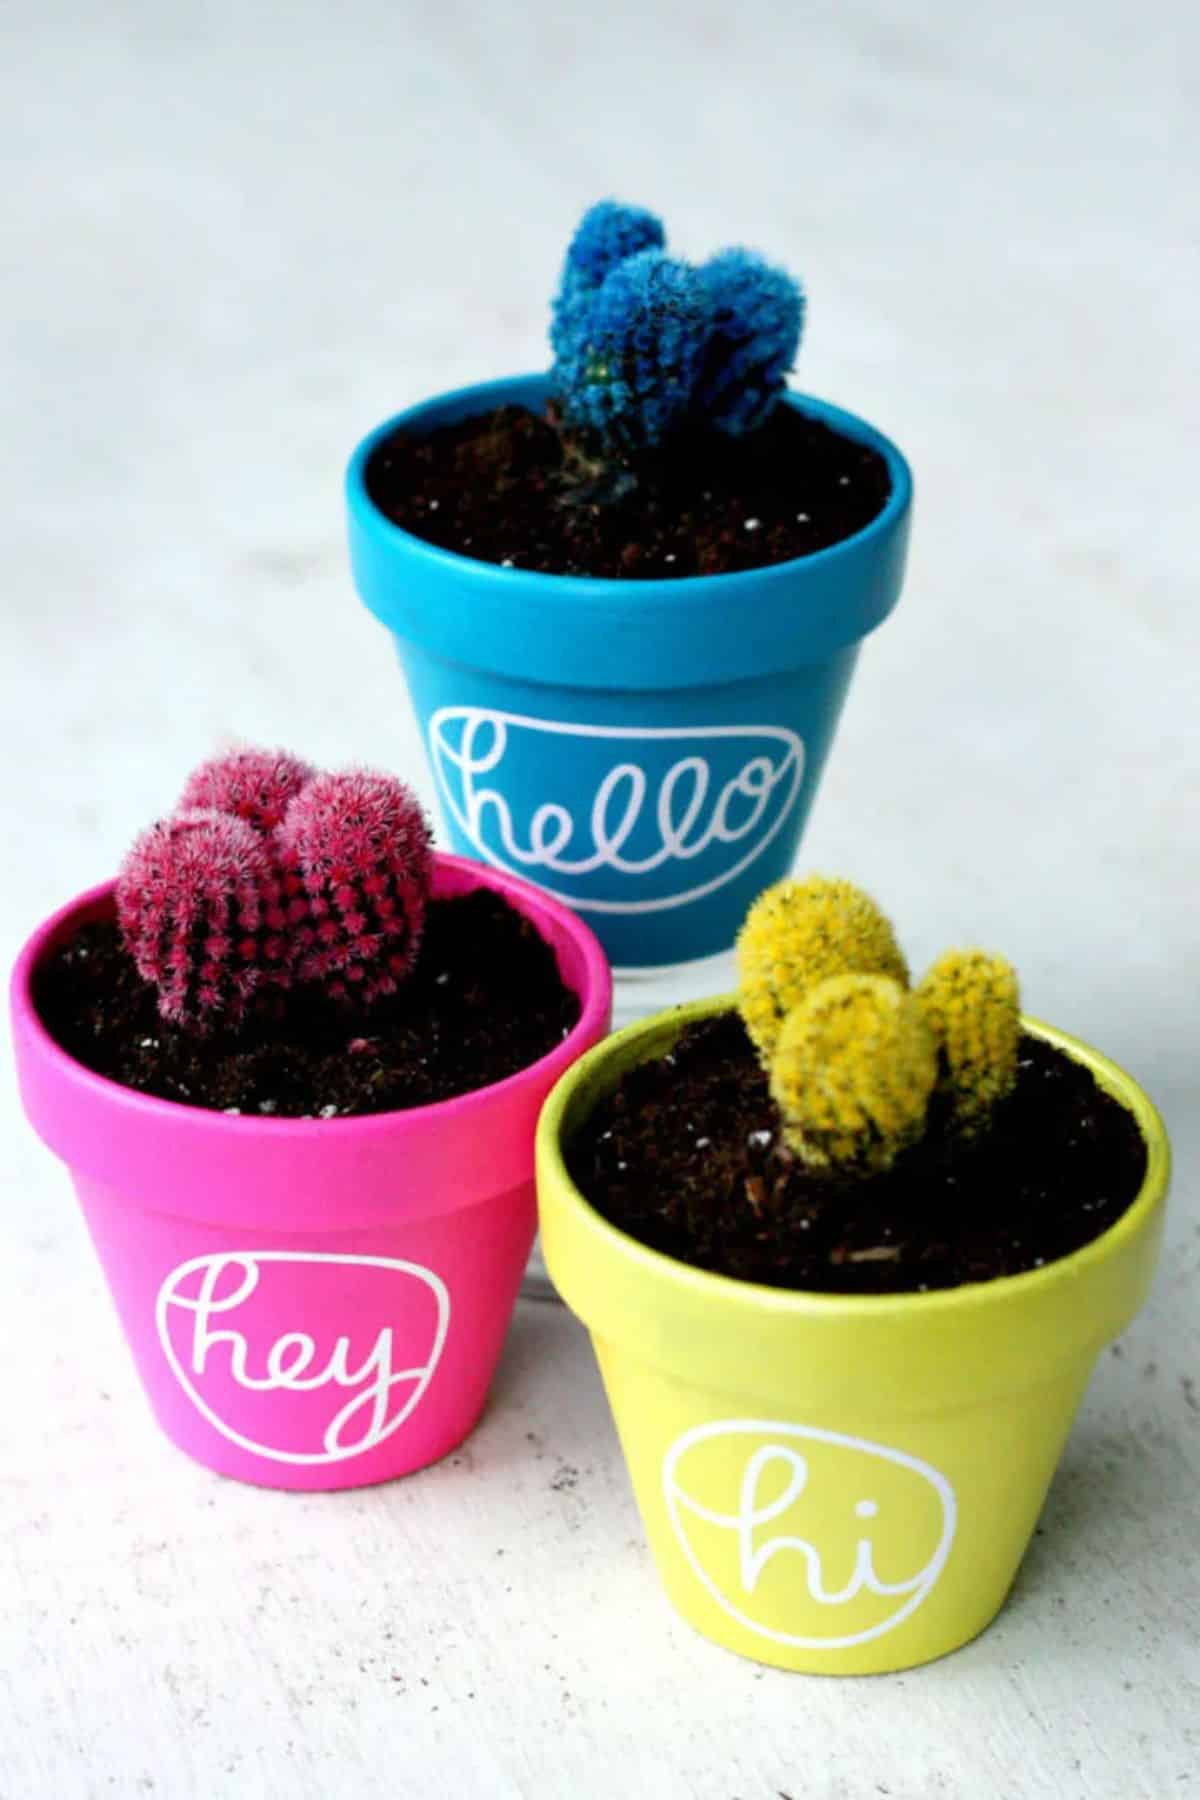 Cactus Pot Painting for Colorful Home Decor